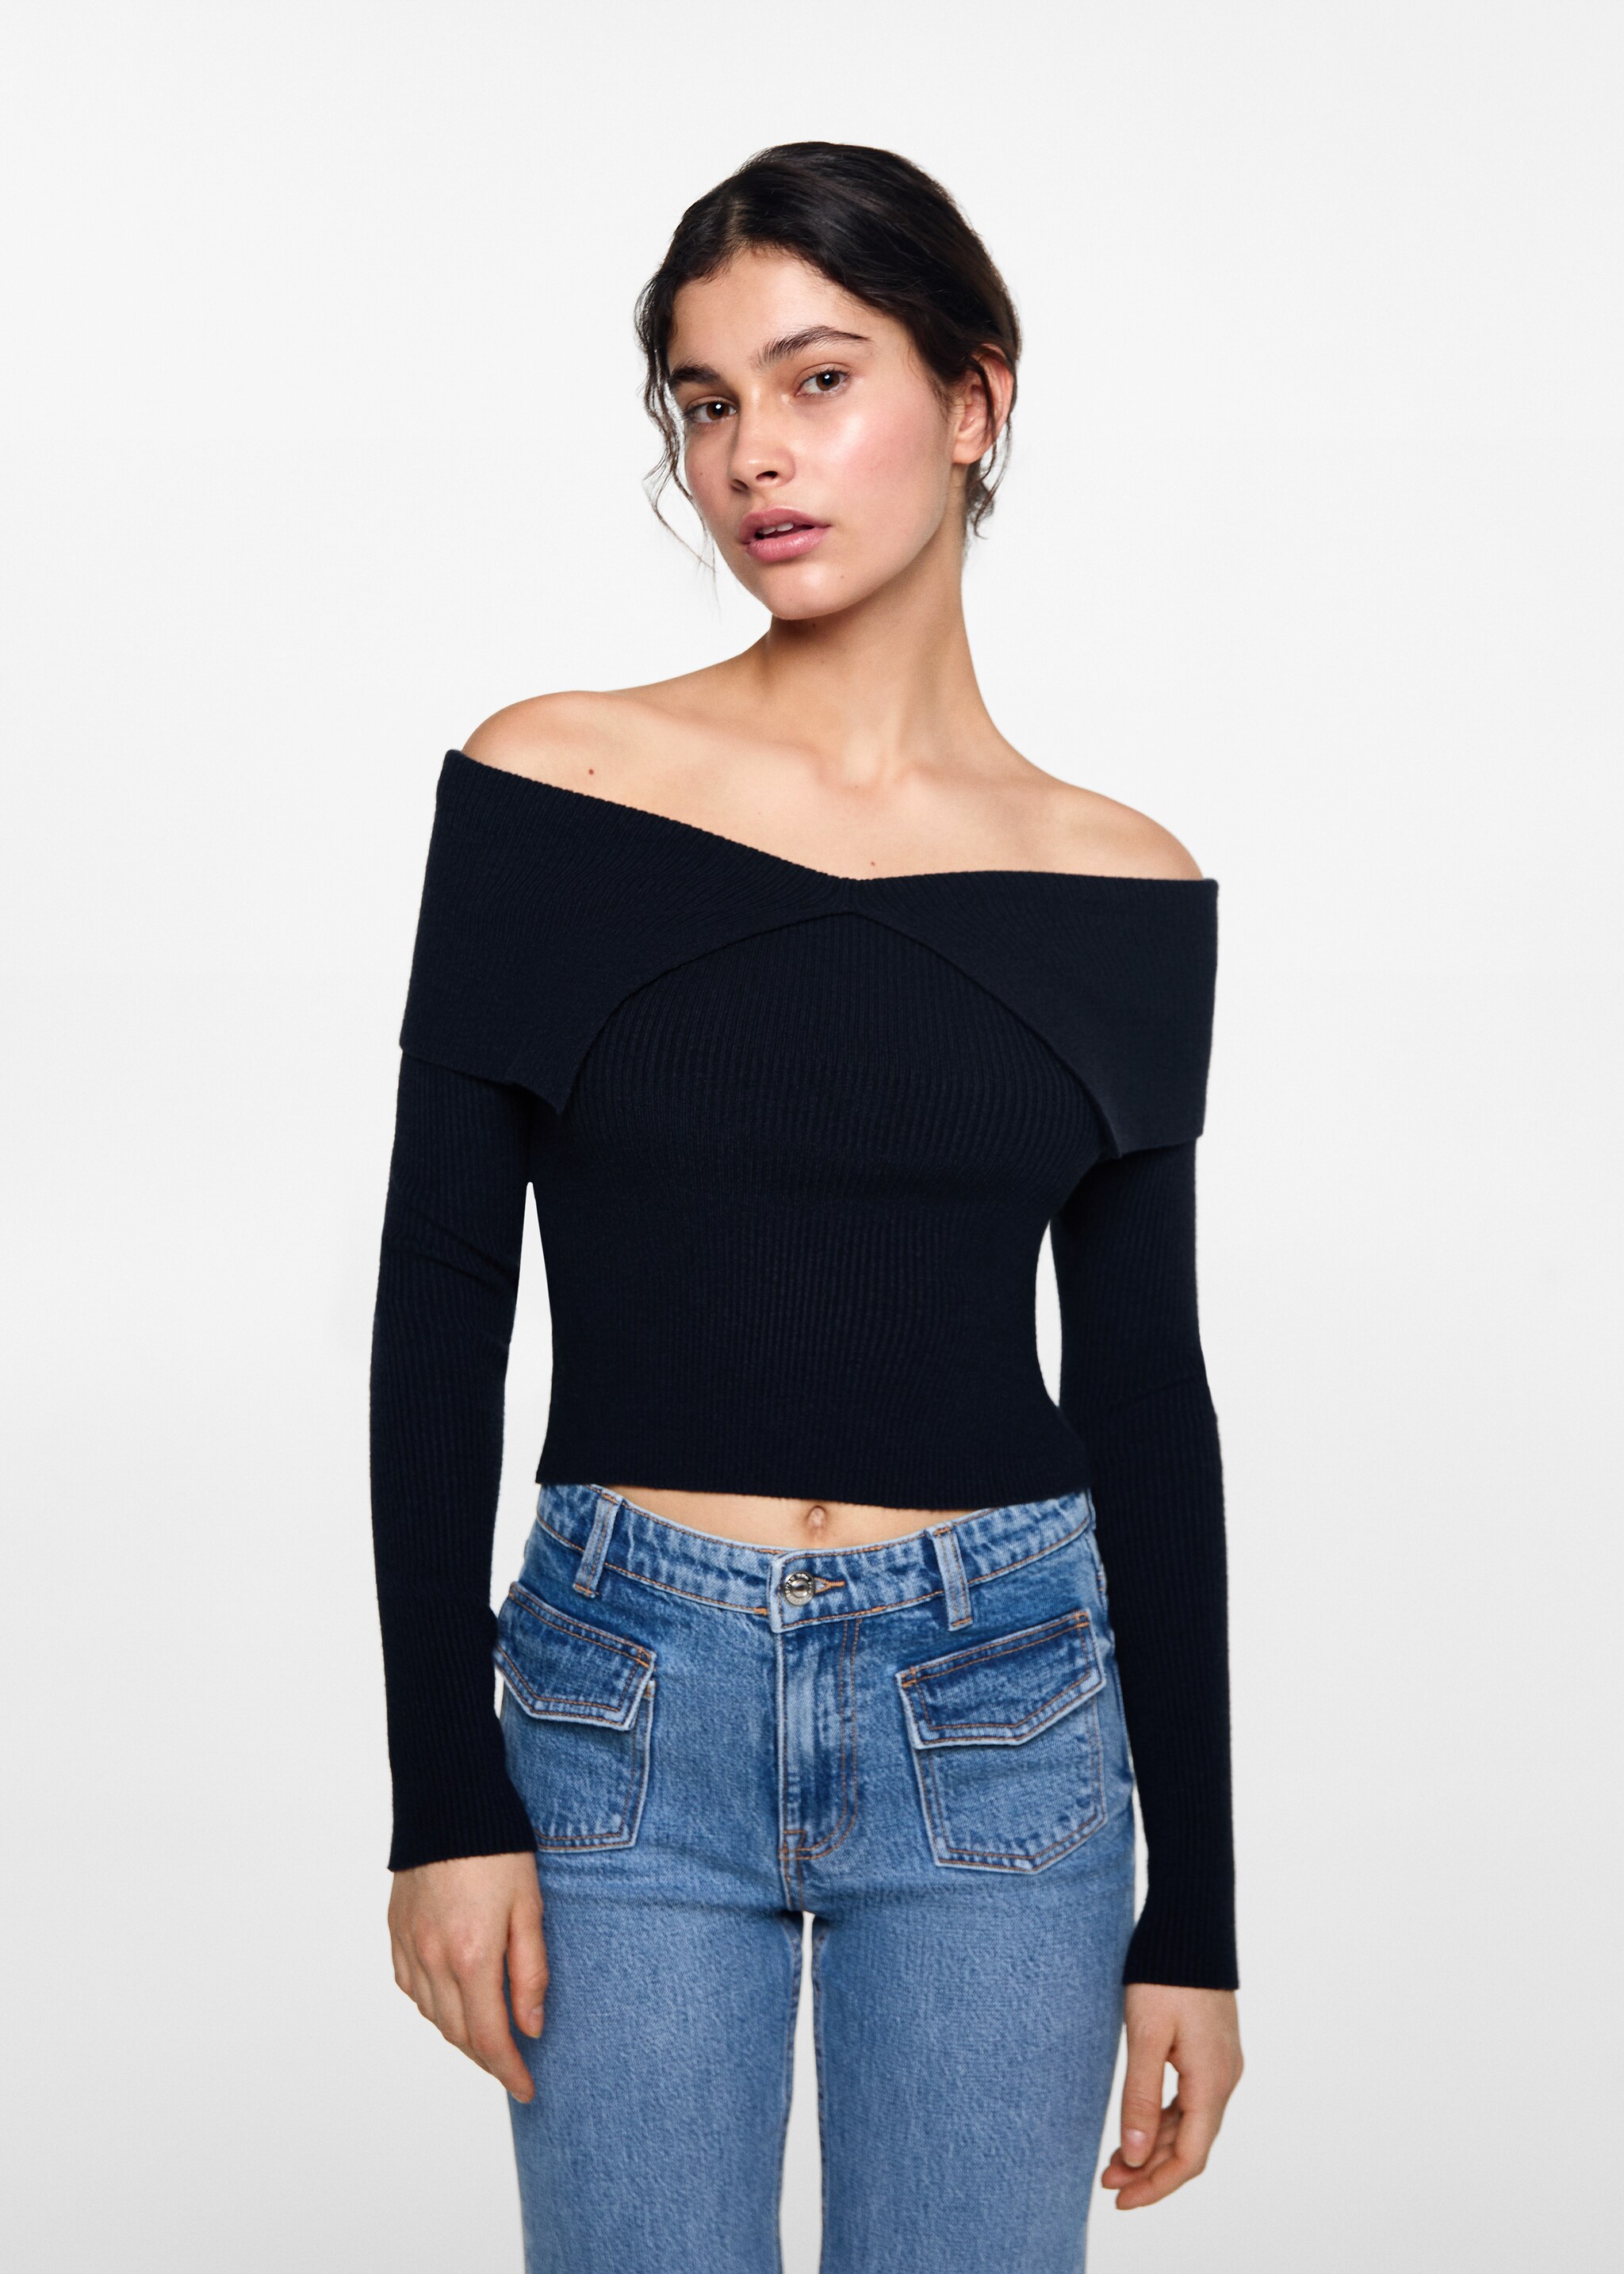 Off-the-shoulder knitted sweater - Medium plane